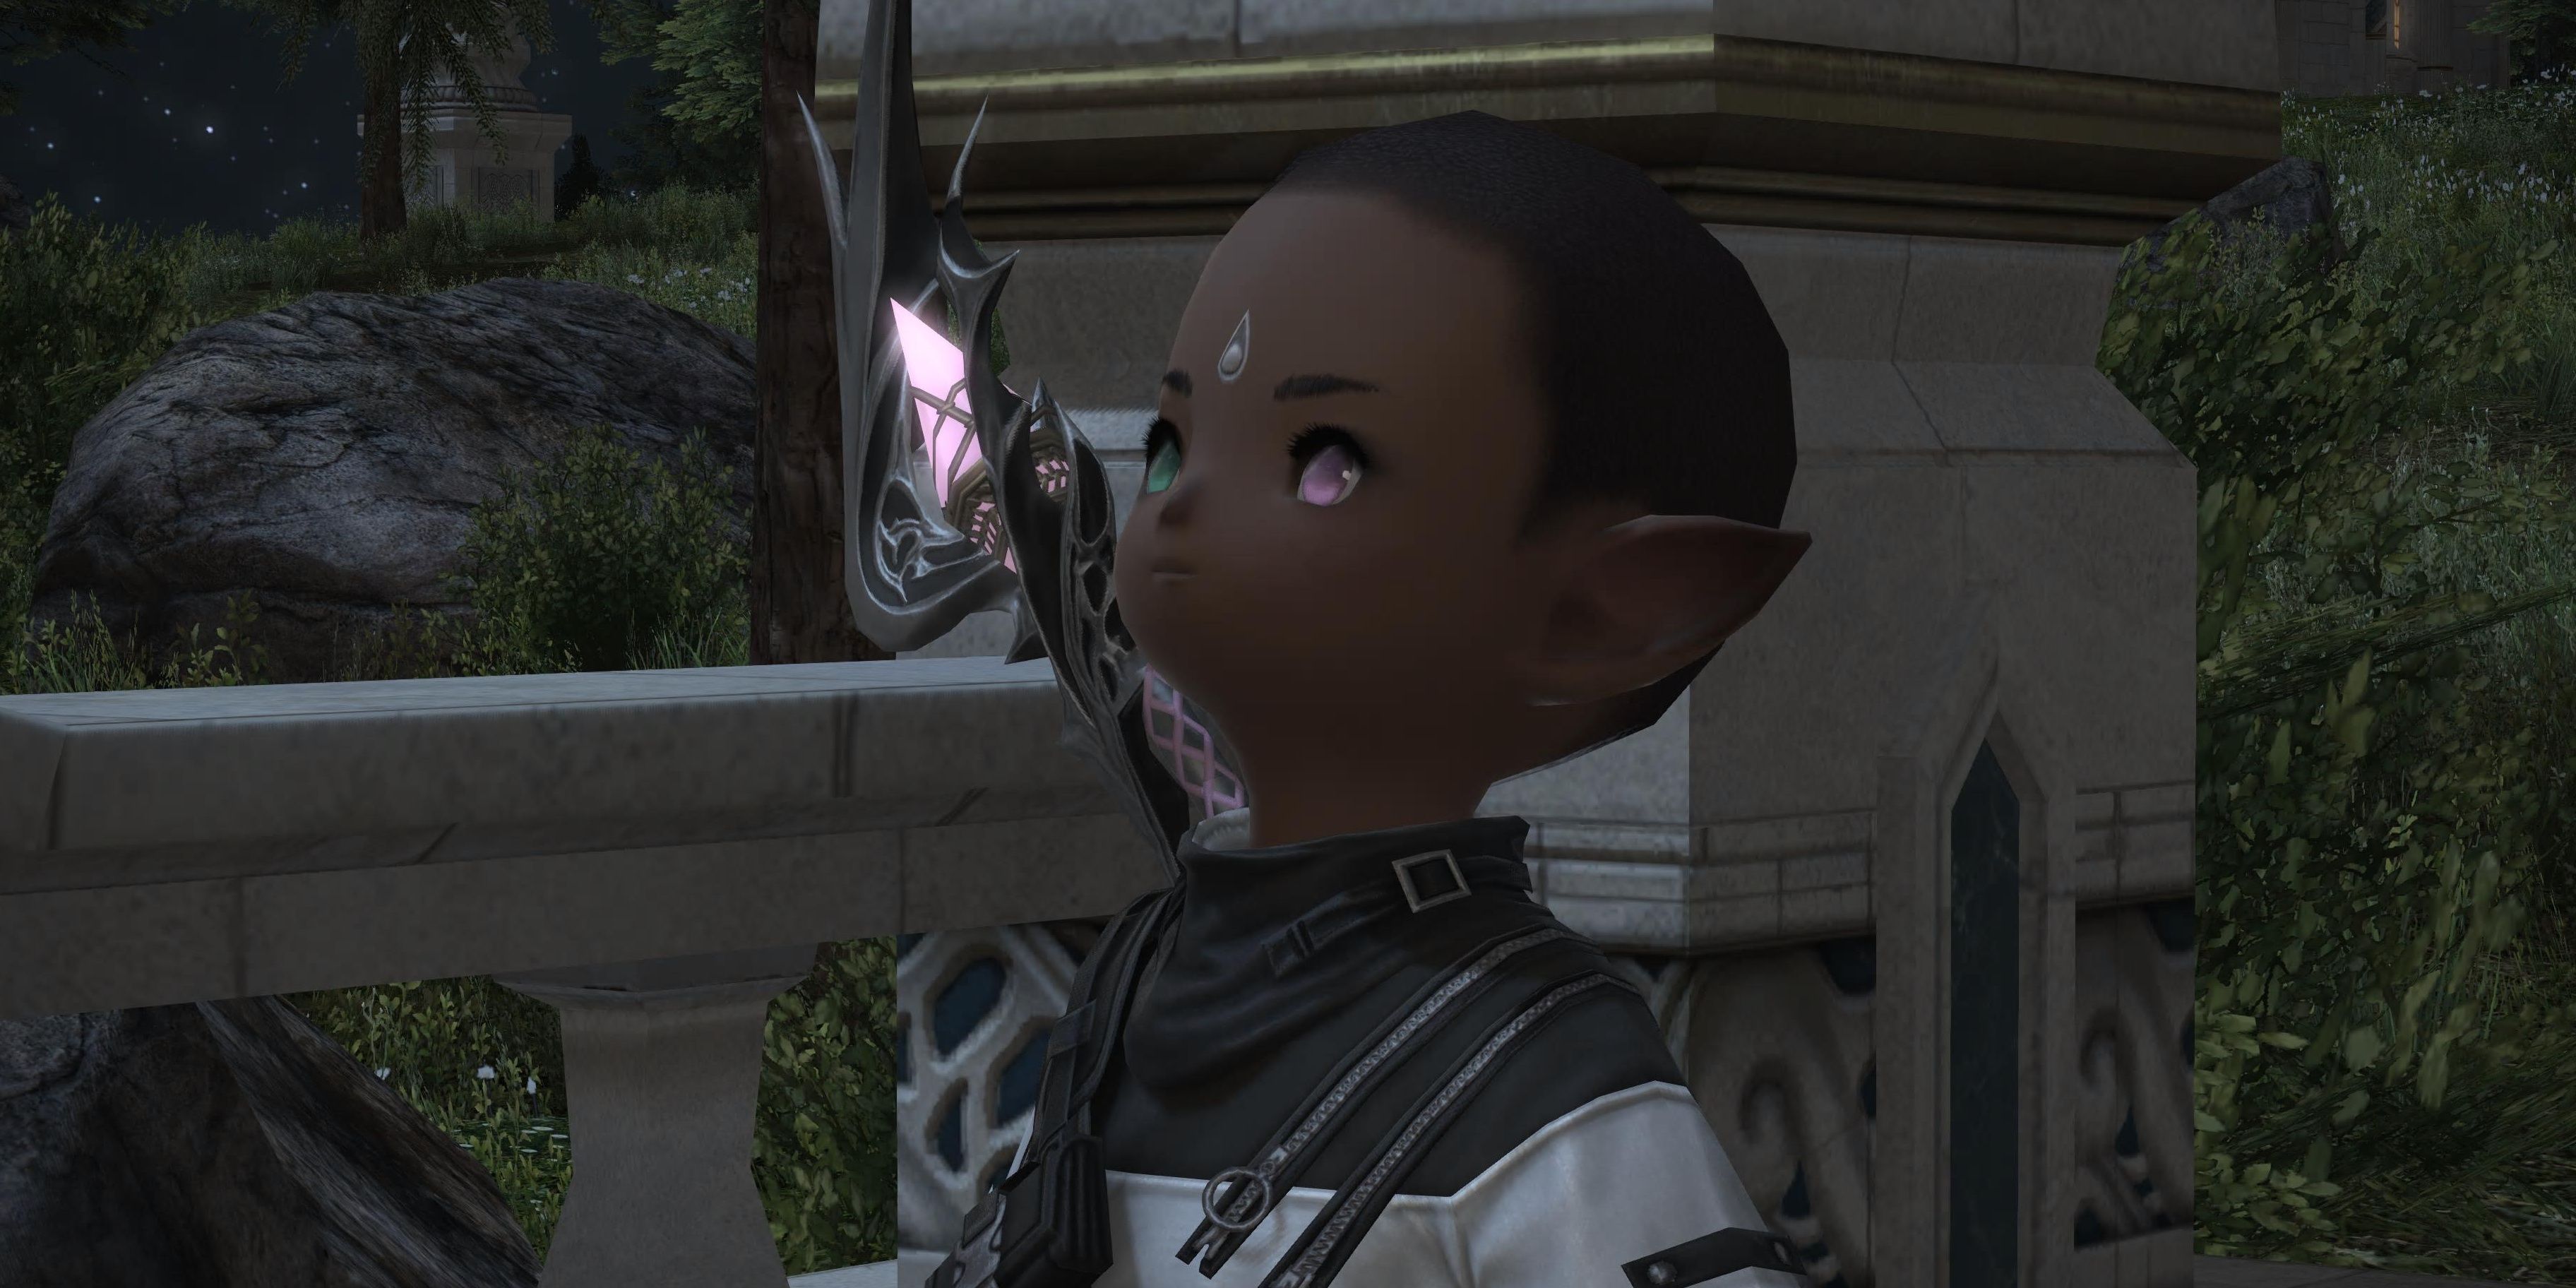 The Warrior of Light looks contemplatively at the sky in Final Fantasy 14